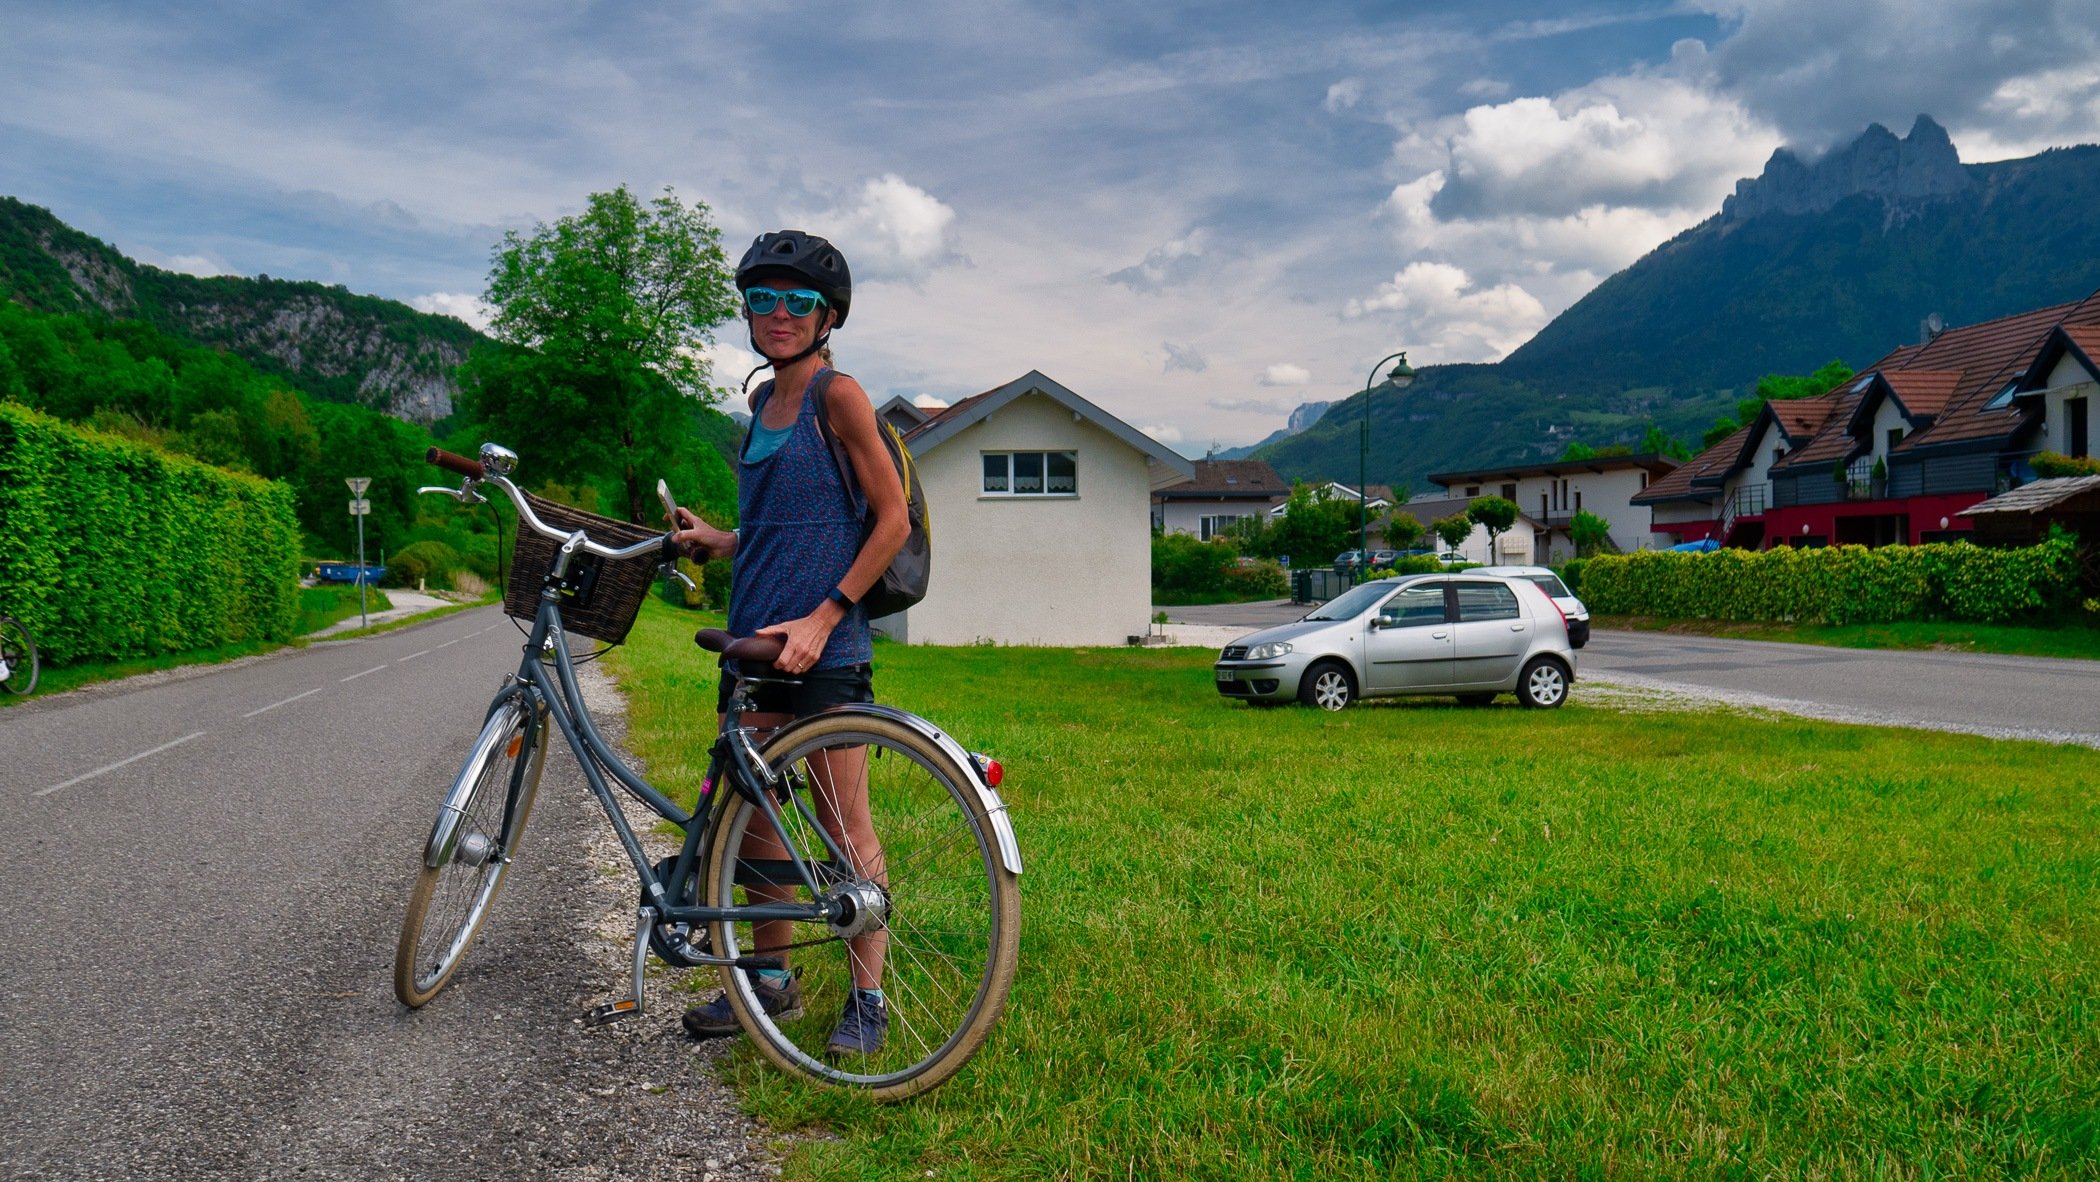 Doussard to Annecy - Tour de Lac cycle route